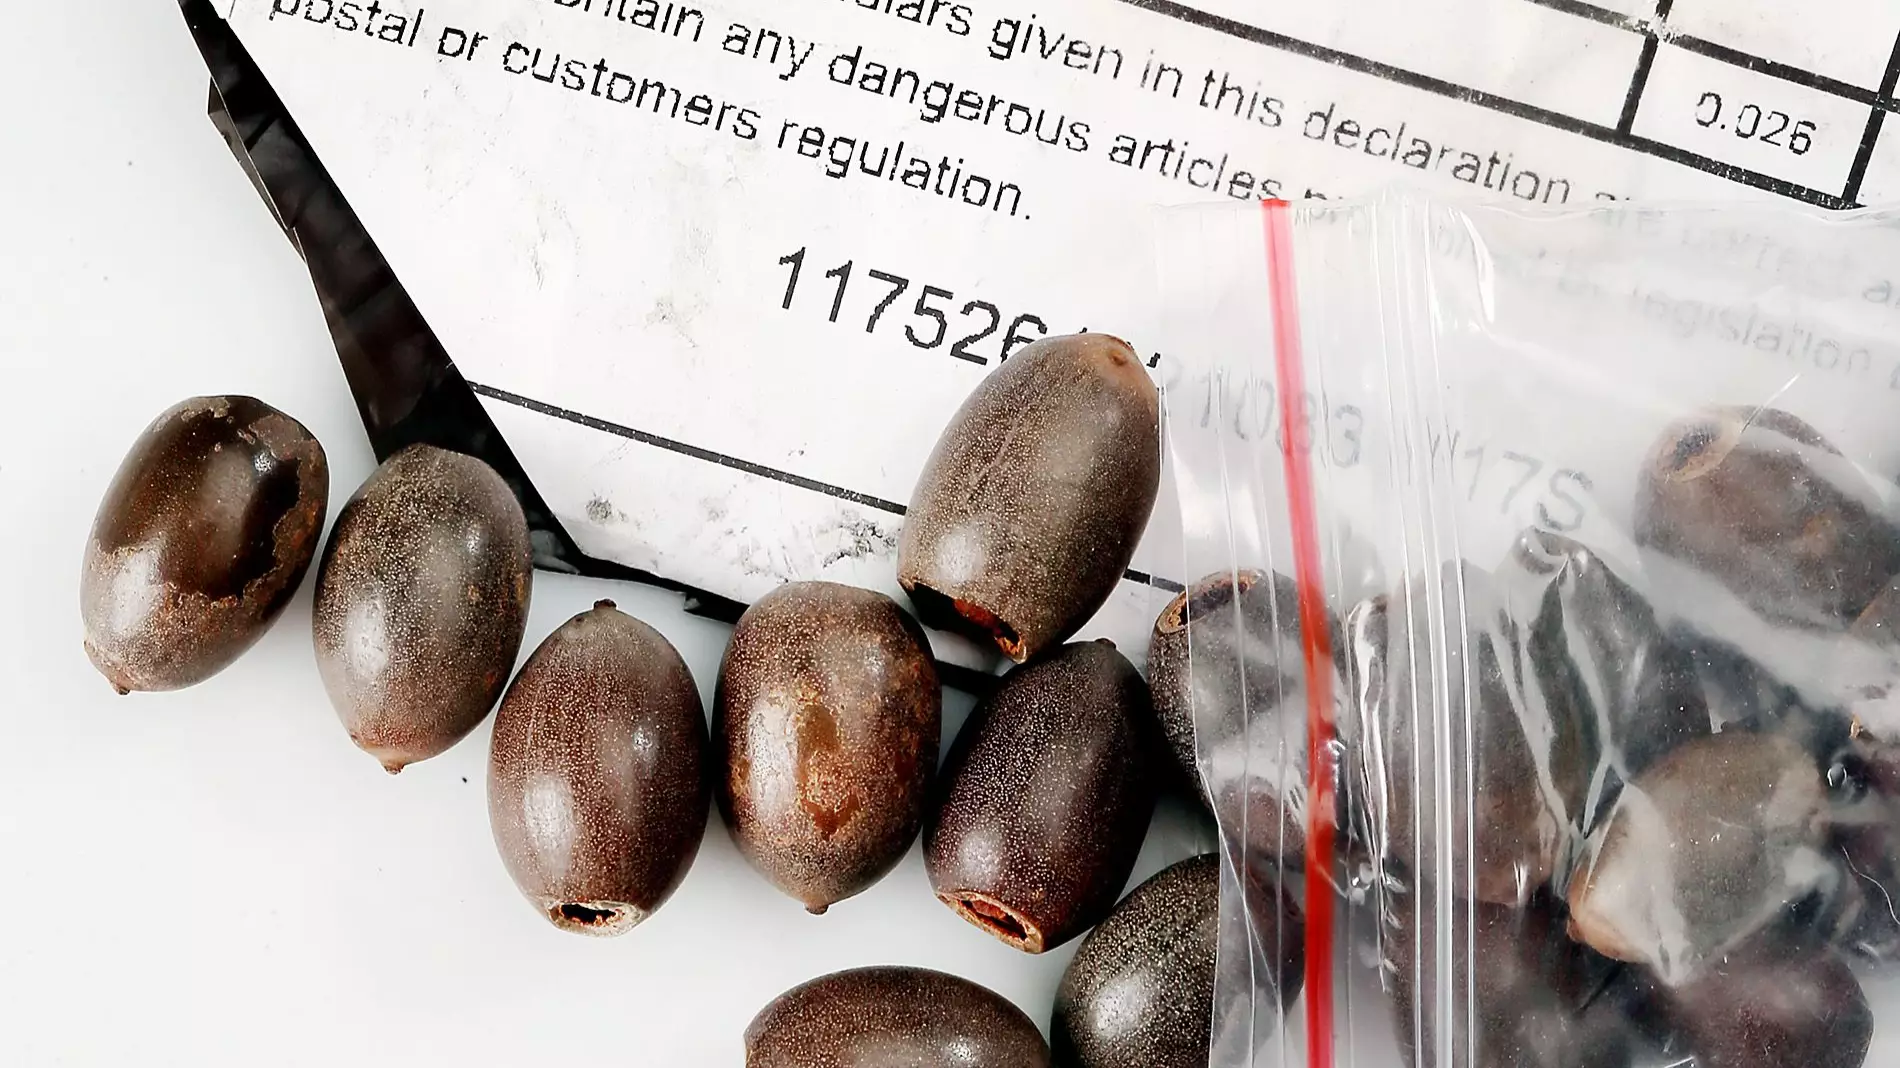 People Keep Receiving Mystery Packets Of Seeds In The Post From China